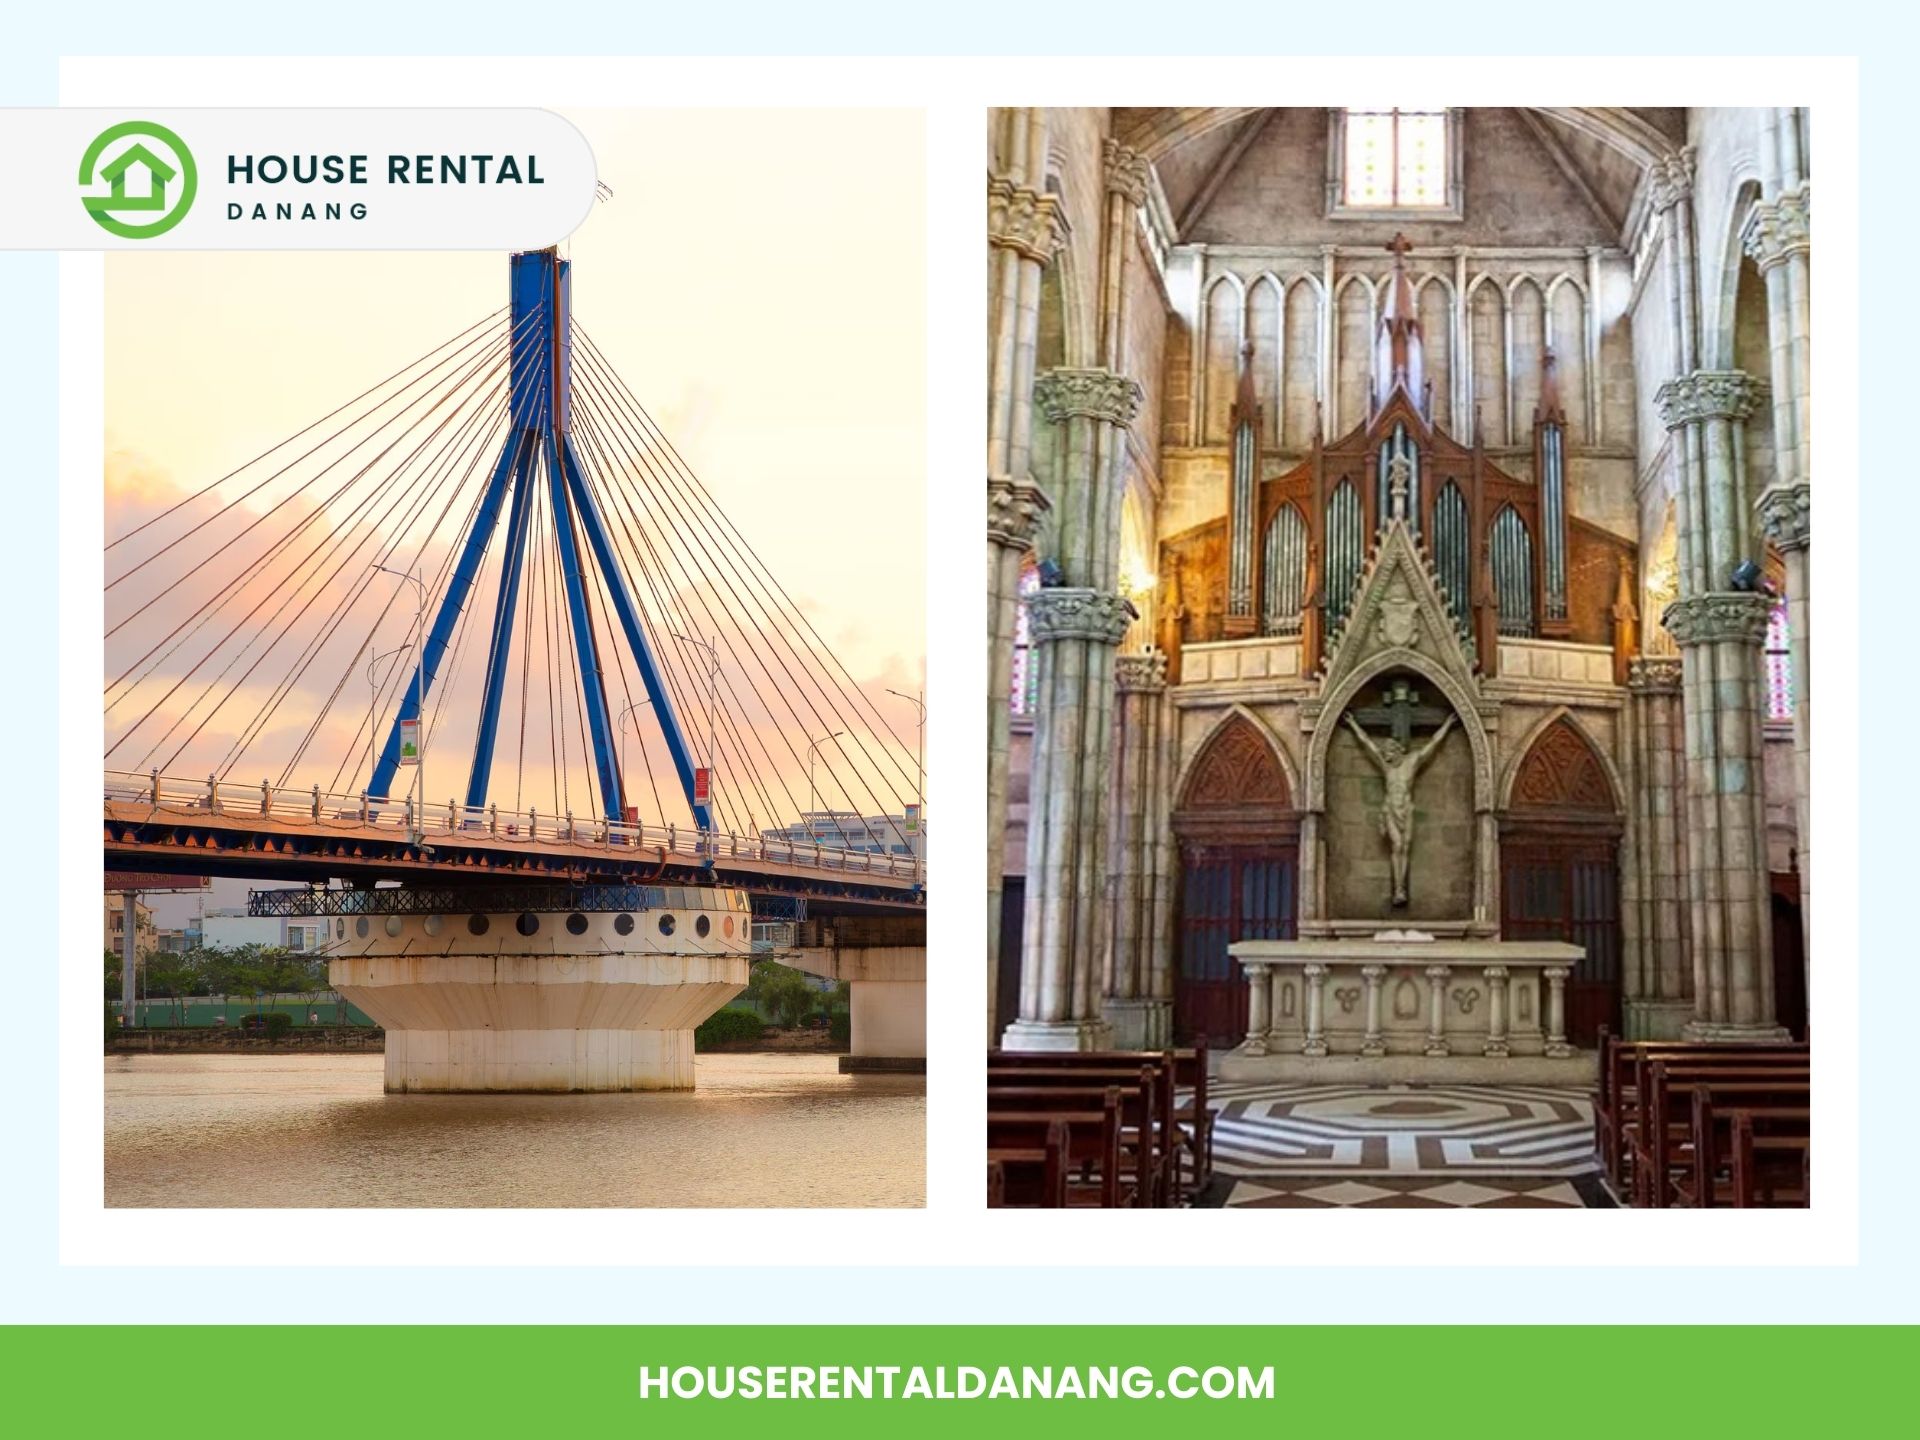 The image shows a two-part collage. The left section features the Tran Thi Ly Bridge, a blue cable-stayed structure over a river during sunset. The right section depicts the interior of a Gothic-style cathedral with a prominent altar.